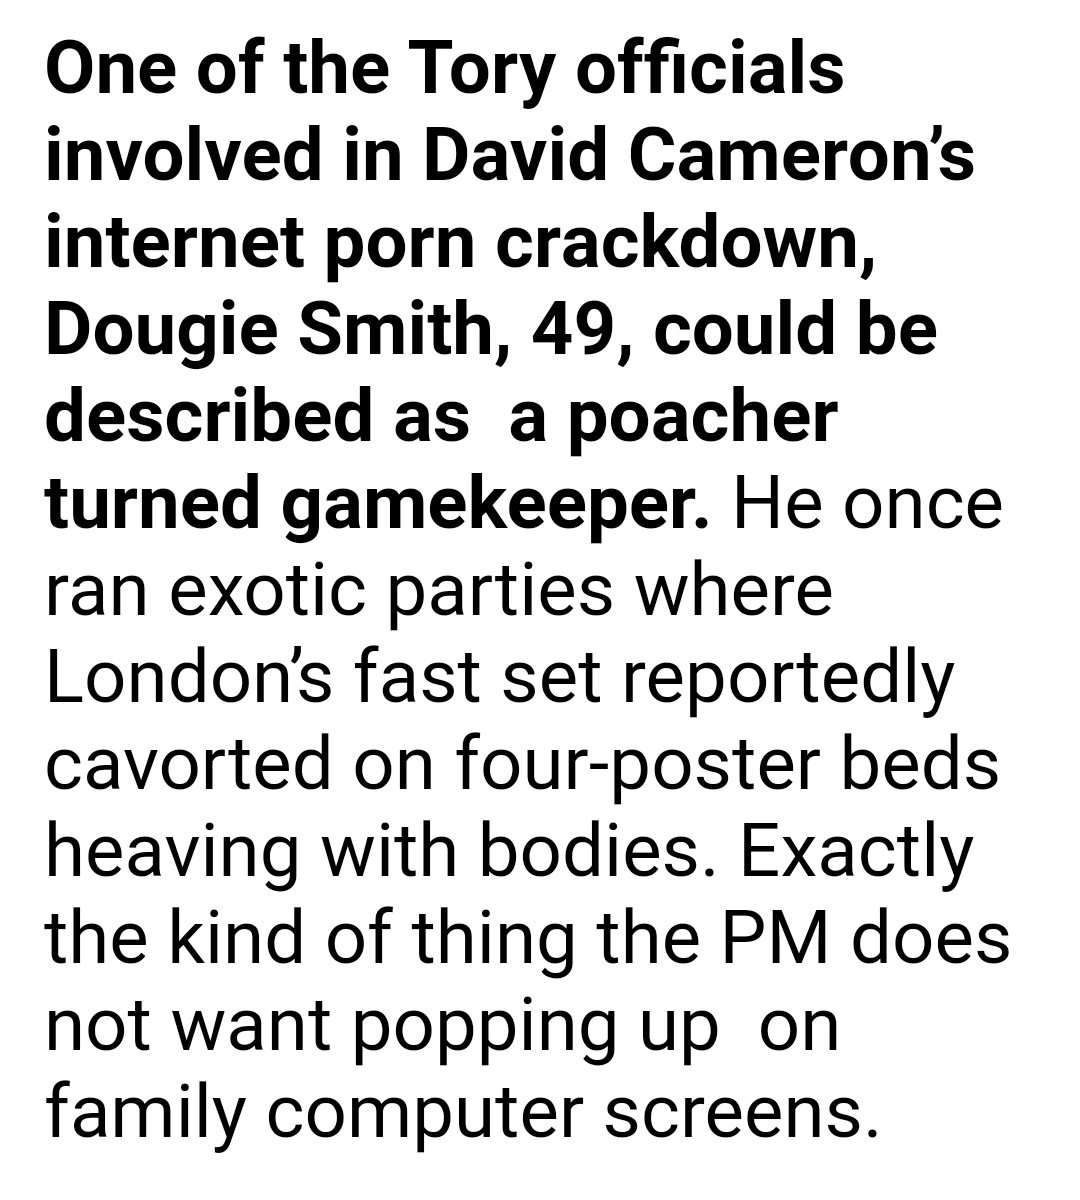 ... and organiser of orgies by night!How bizarre that BoJo the Clown should employ as one of his five closest confidentes a veteran Living Marxist whose husband organises sex parties!